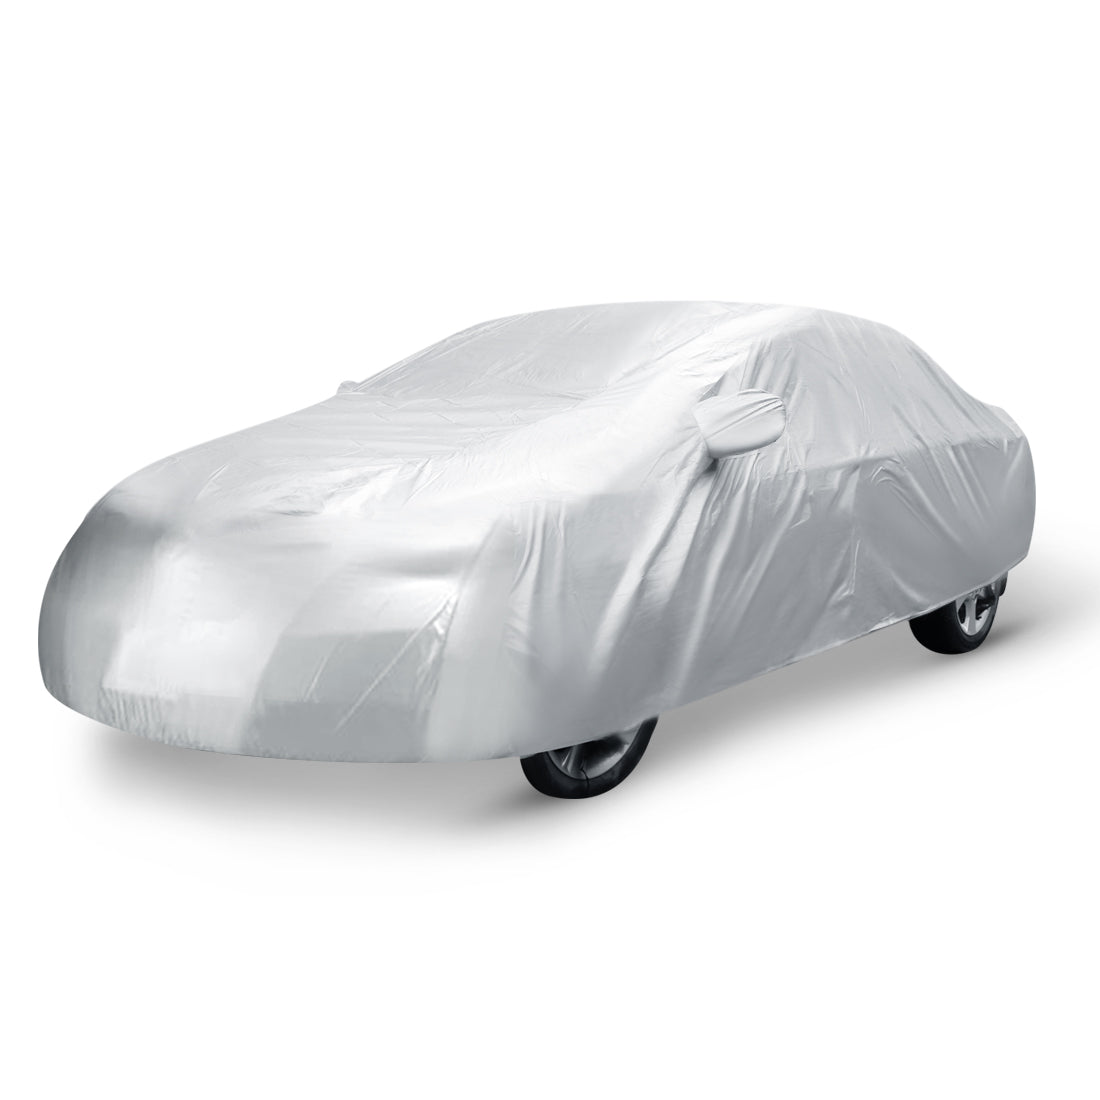 uxcell Uxcell Sedan Car Cover Waterproof Outdoor Sun Rain Resistant Protection for Chevrolet Cruze 4.45M x 1.8M x 1.45M